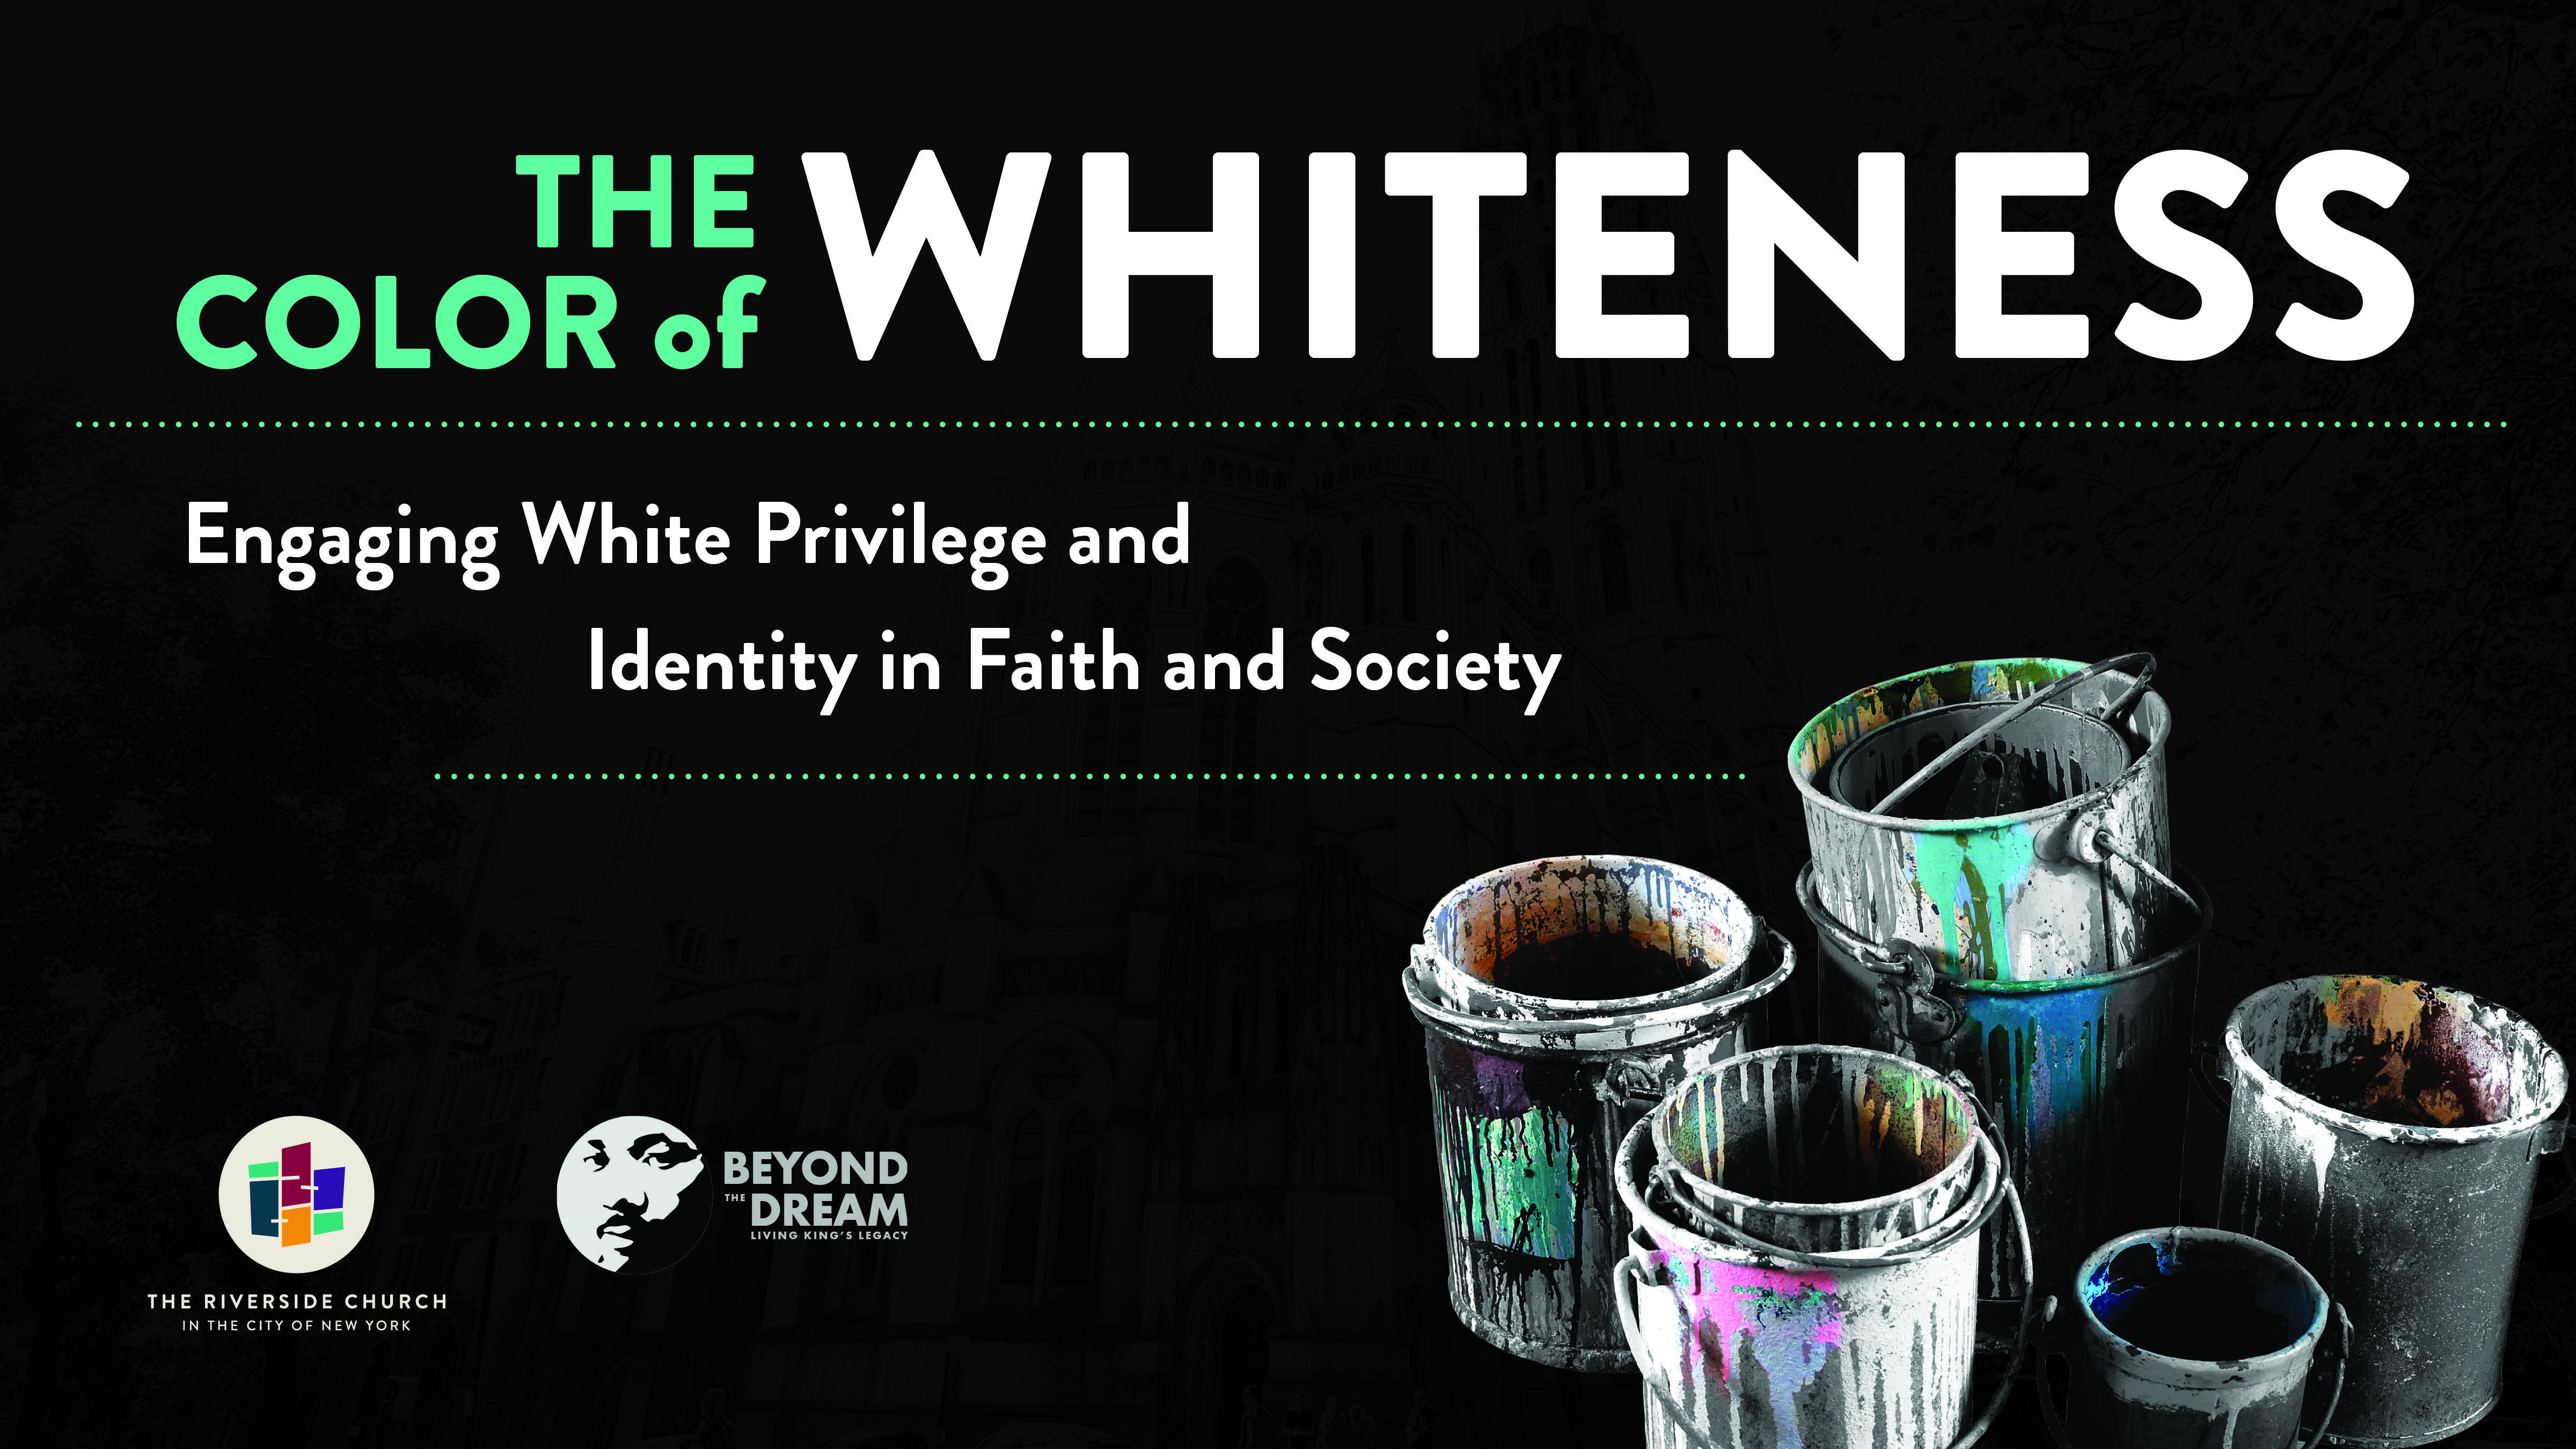 The Color of Whiteness: Engaging White Privilege and Identity in Faith and Society